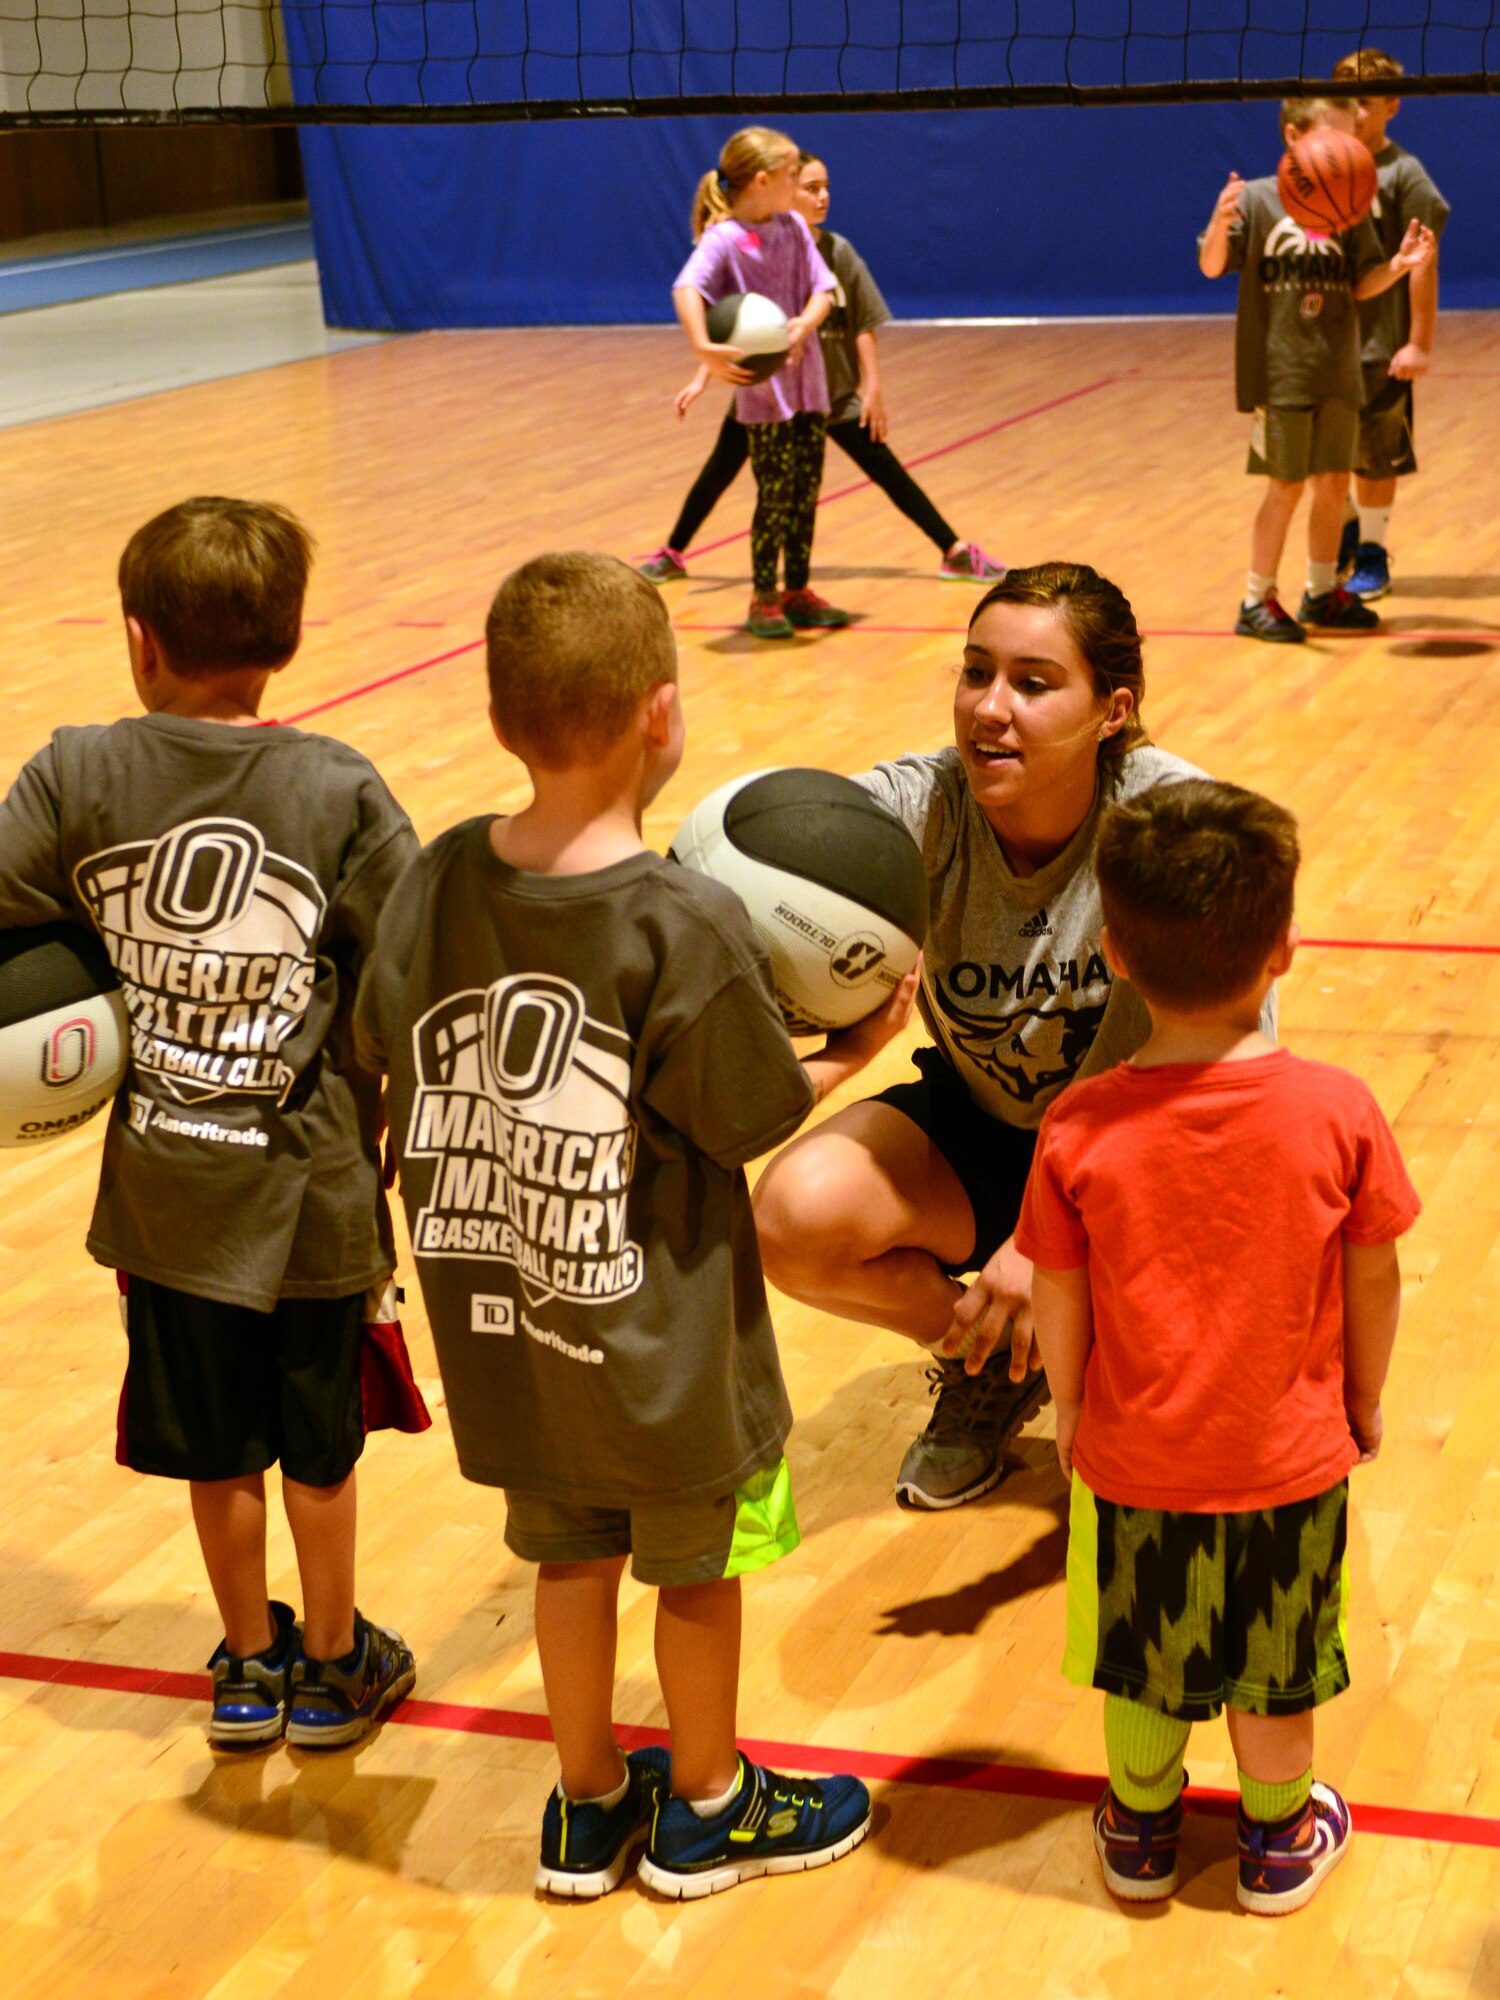 Abi Lujan, University of Nebraska Omaha senior, gives Team Offutt children ball-handling tips Oct. 15, 2016 at the Offutt Field House.  The UNO Mavericks’ men’s and women’s basketball teams provided a free basketball clinic to more than 100 military-affiliated children. Nebraska Governor Pete Ricketts spoke to the campers and passed along thanks from the citizens of Nebraska to the members of Team Offutt.